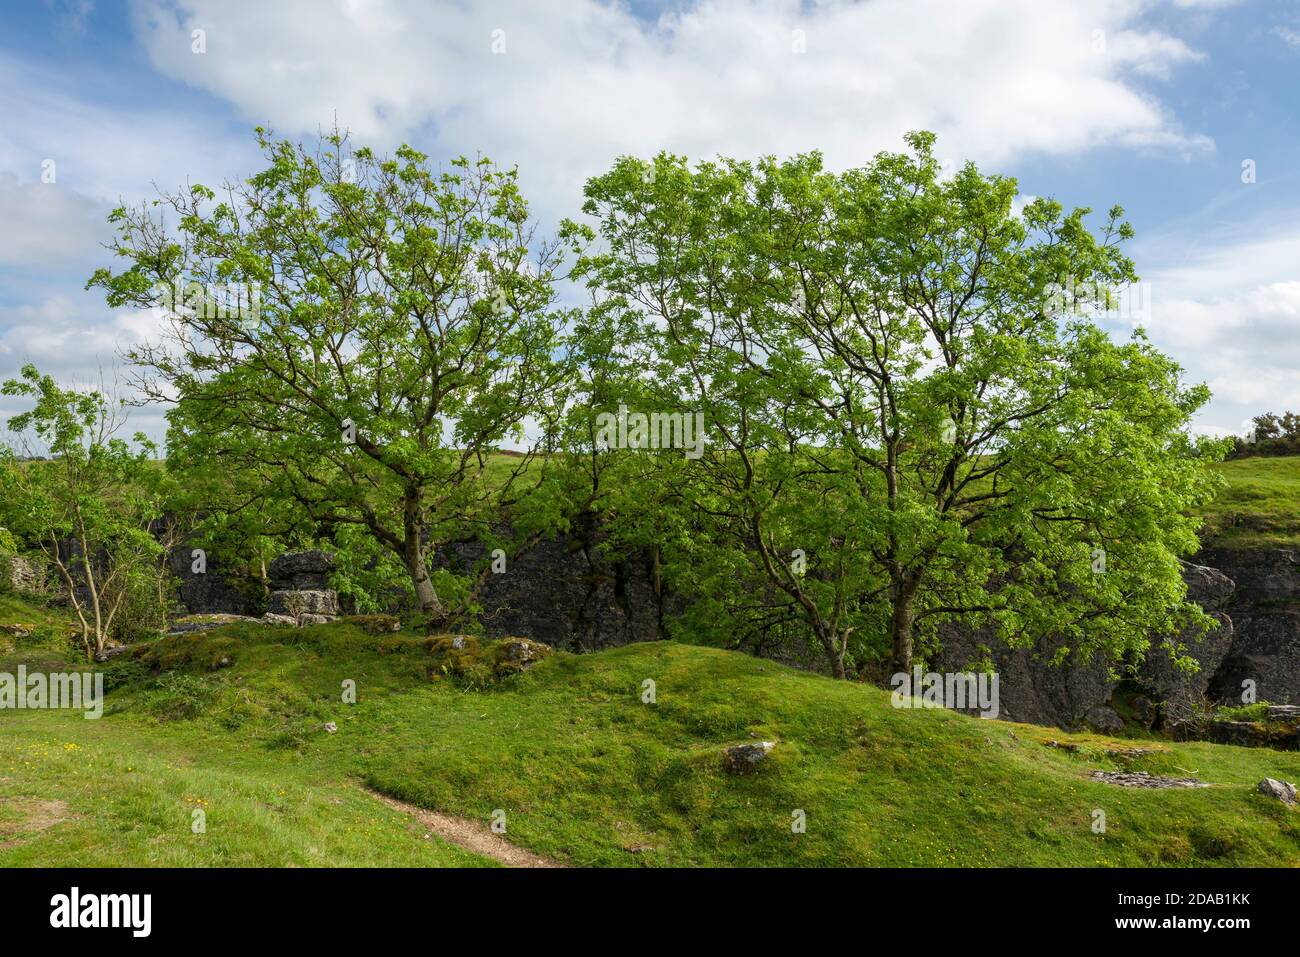 European Ash trees growing in an old abandoned lead mine rake at Ubley Warren Nature Reserve in the Mendip Hills National Landscape, Somerset, England. Stock Photo